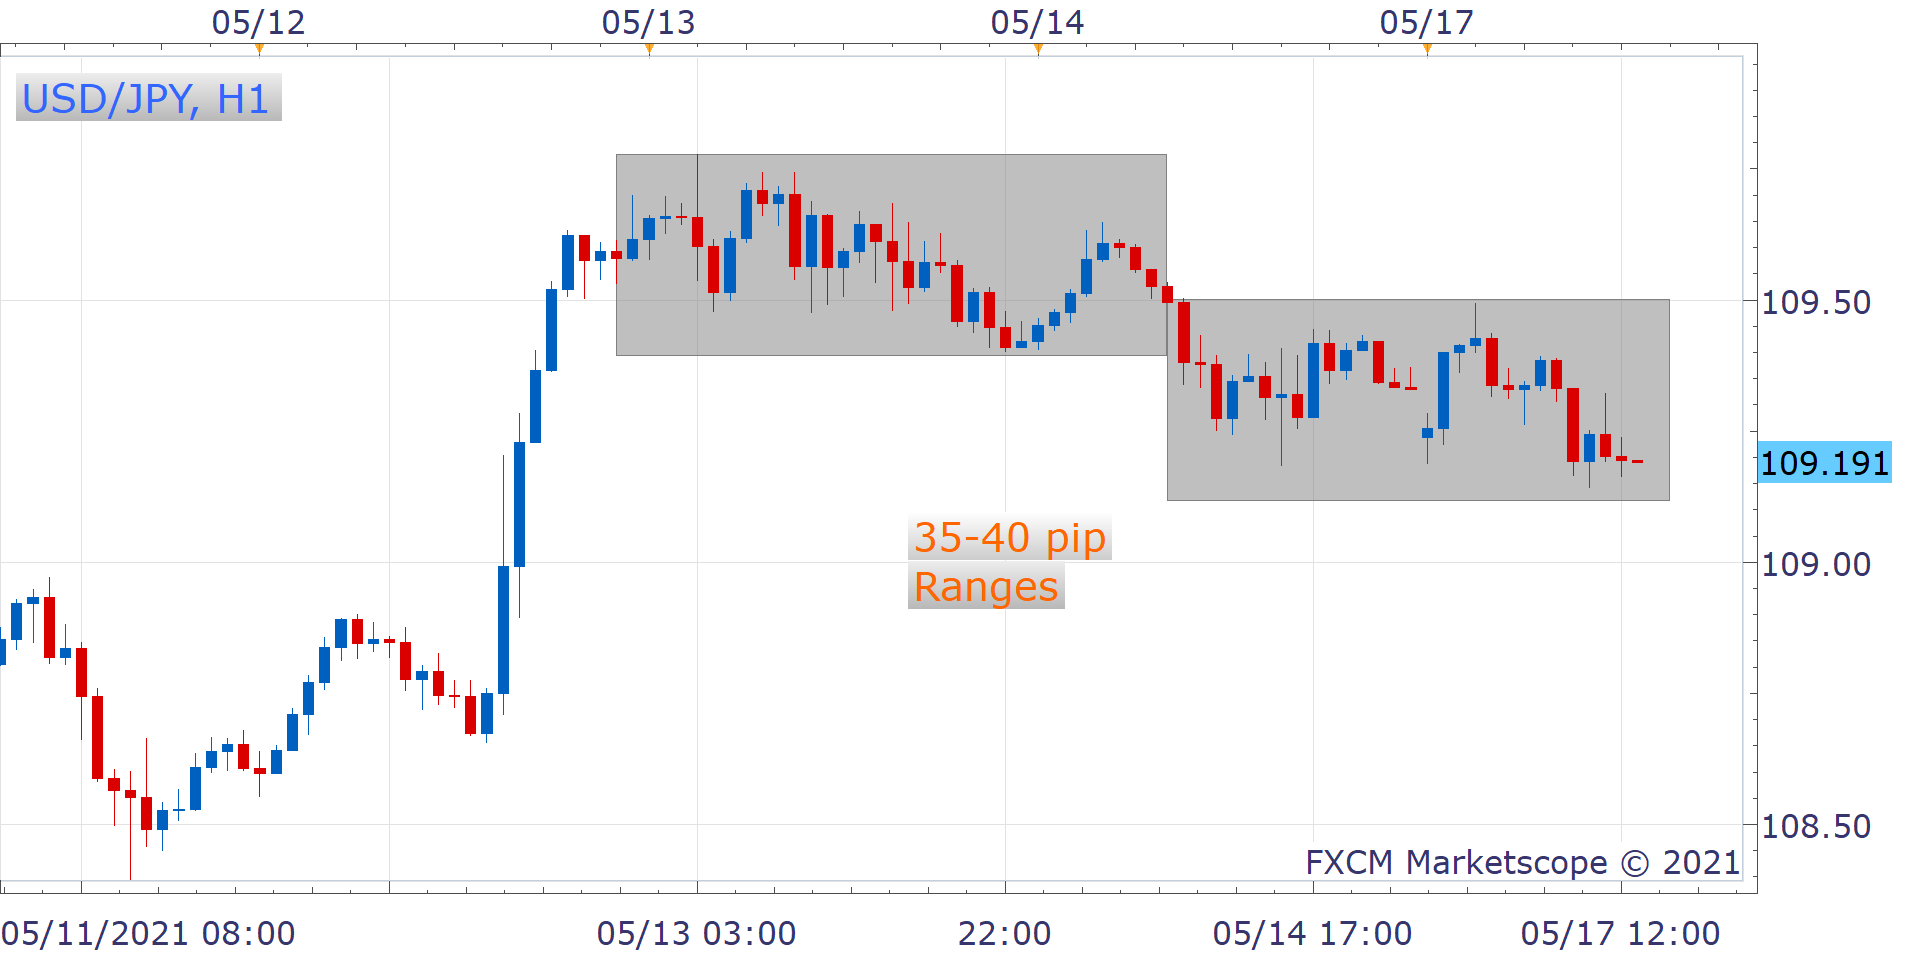 12 Of The Best Forex Trading Strategies - FXCM Markets